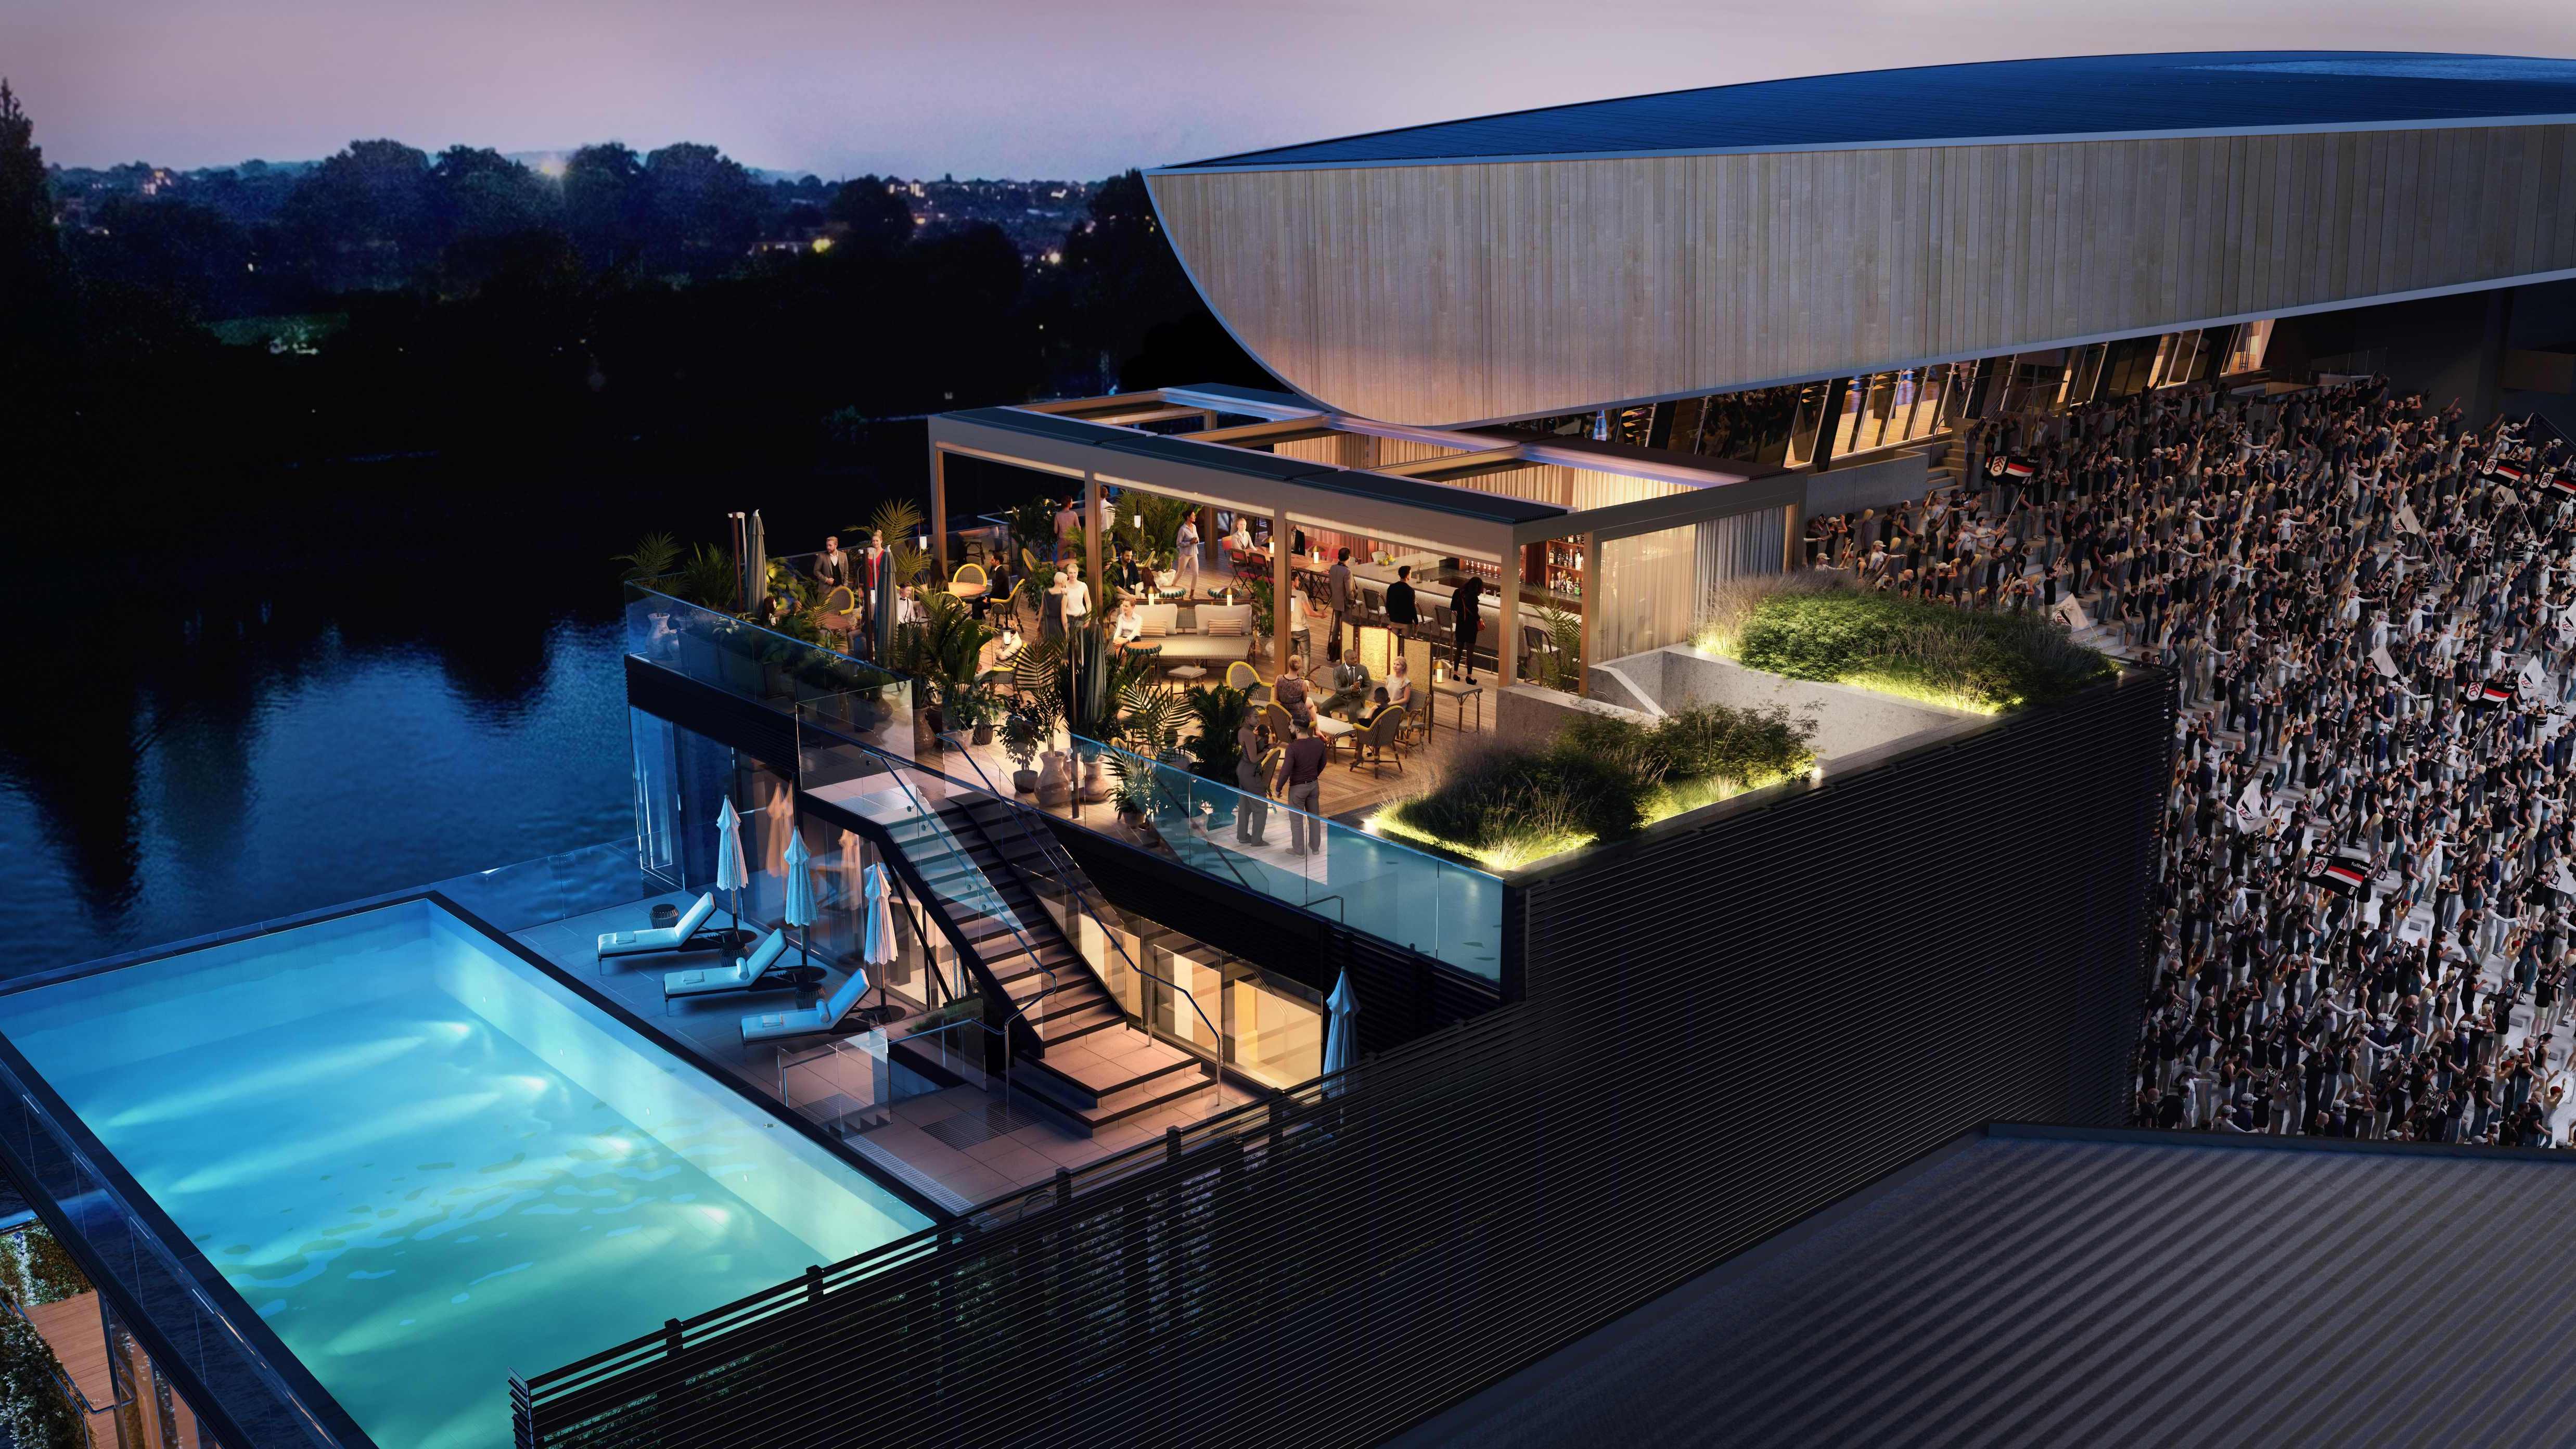 The rooftop swimming pool makes the new stand at Craven Cottage the swankiest in the world